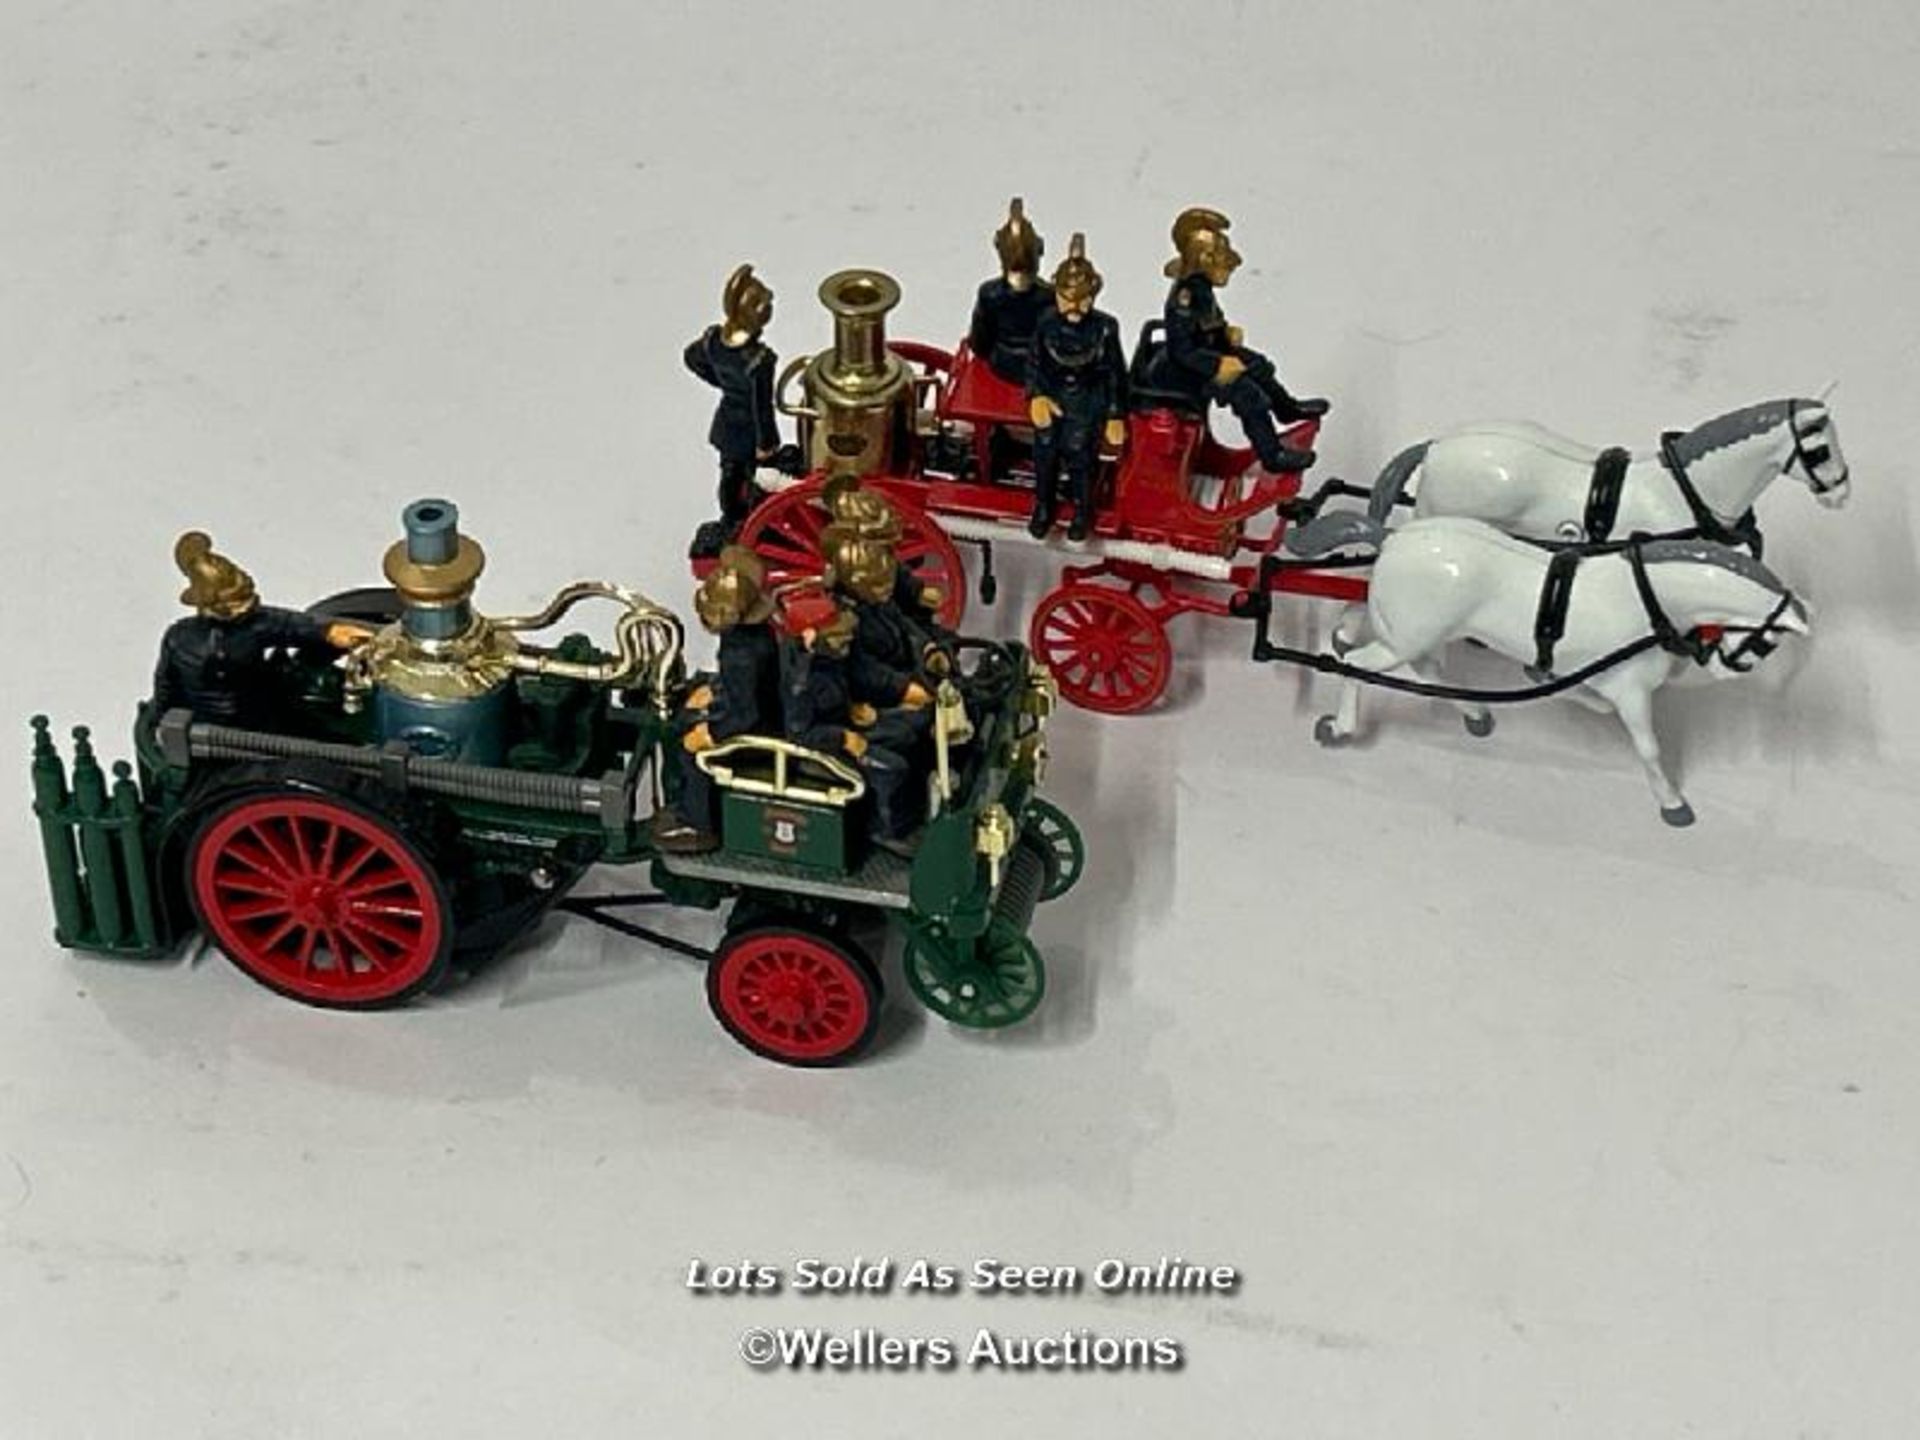 Two unboxed Matchbox models of Yesteryear models including 1905 Bush Fire Engine Y-43 and